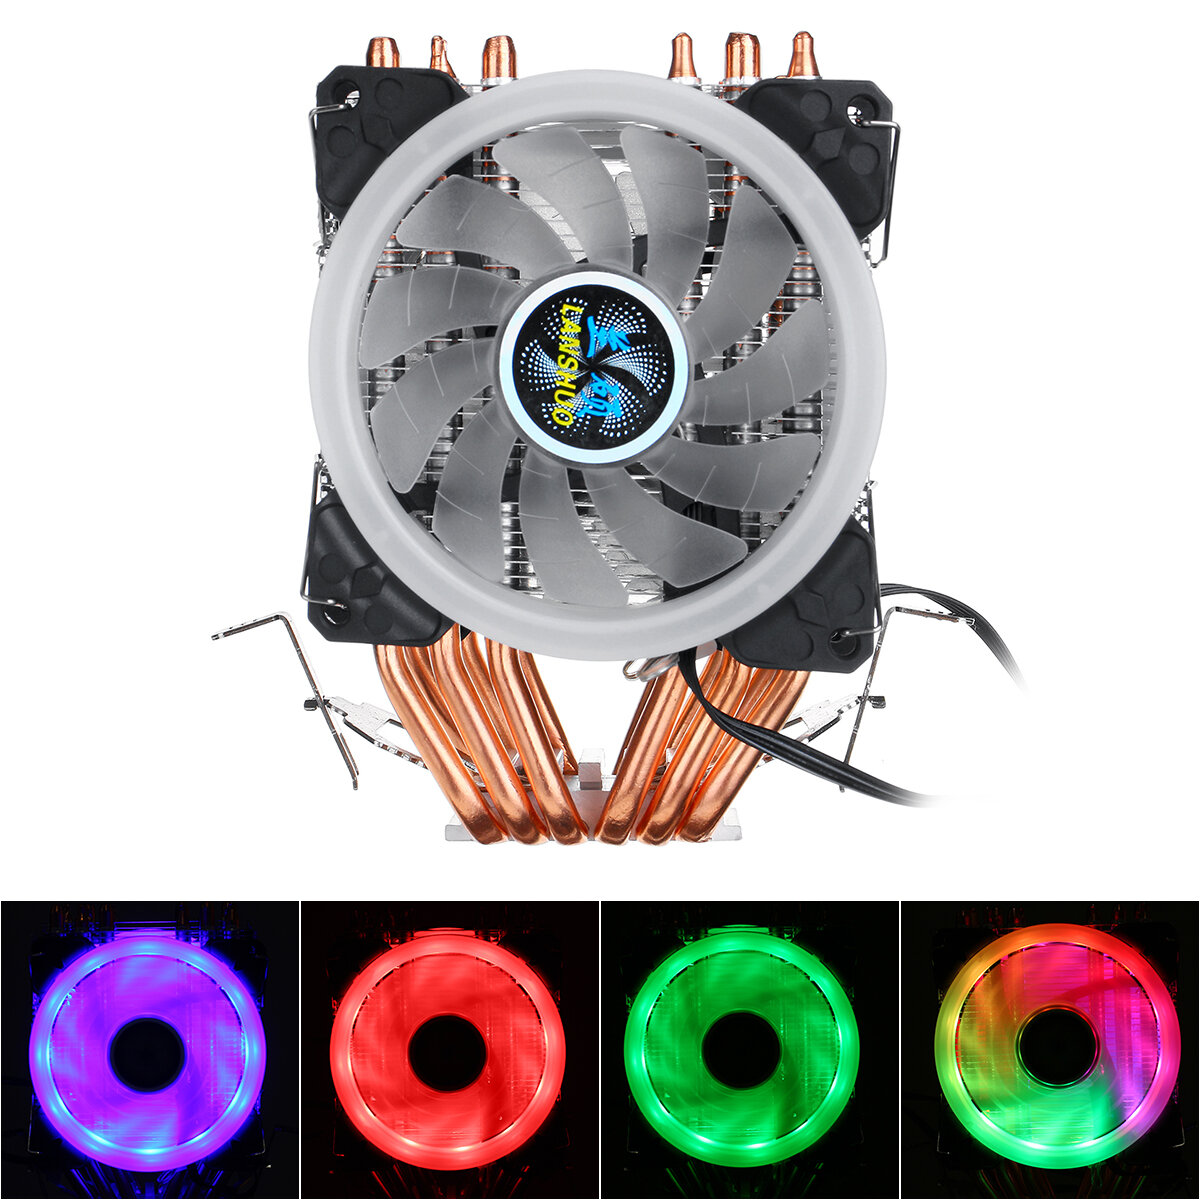 

CPU Cooler LED RGB 6 Heatpipes 4 Pin Dual Fan For Intel 1156/1155/1151/775 AMD